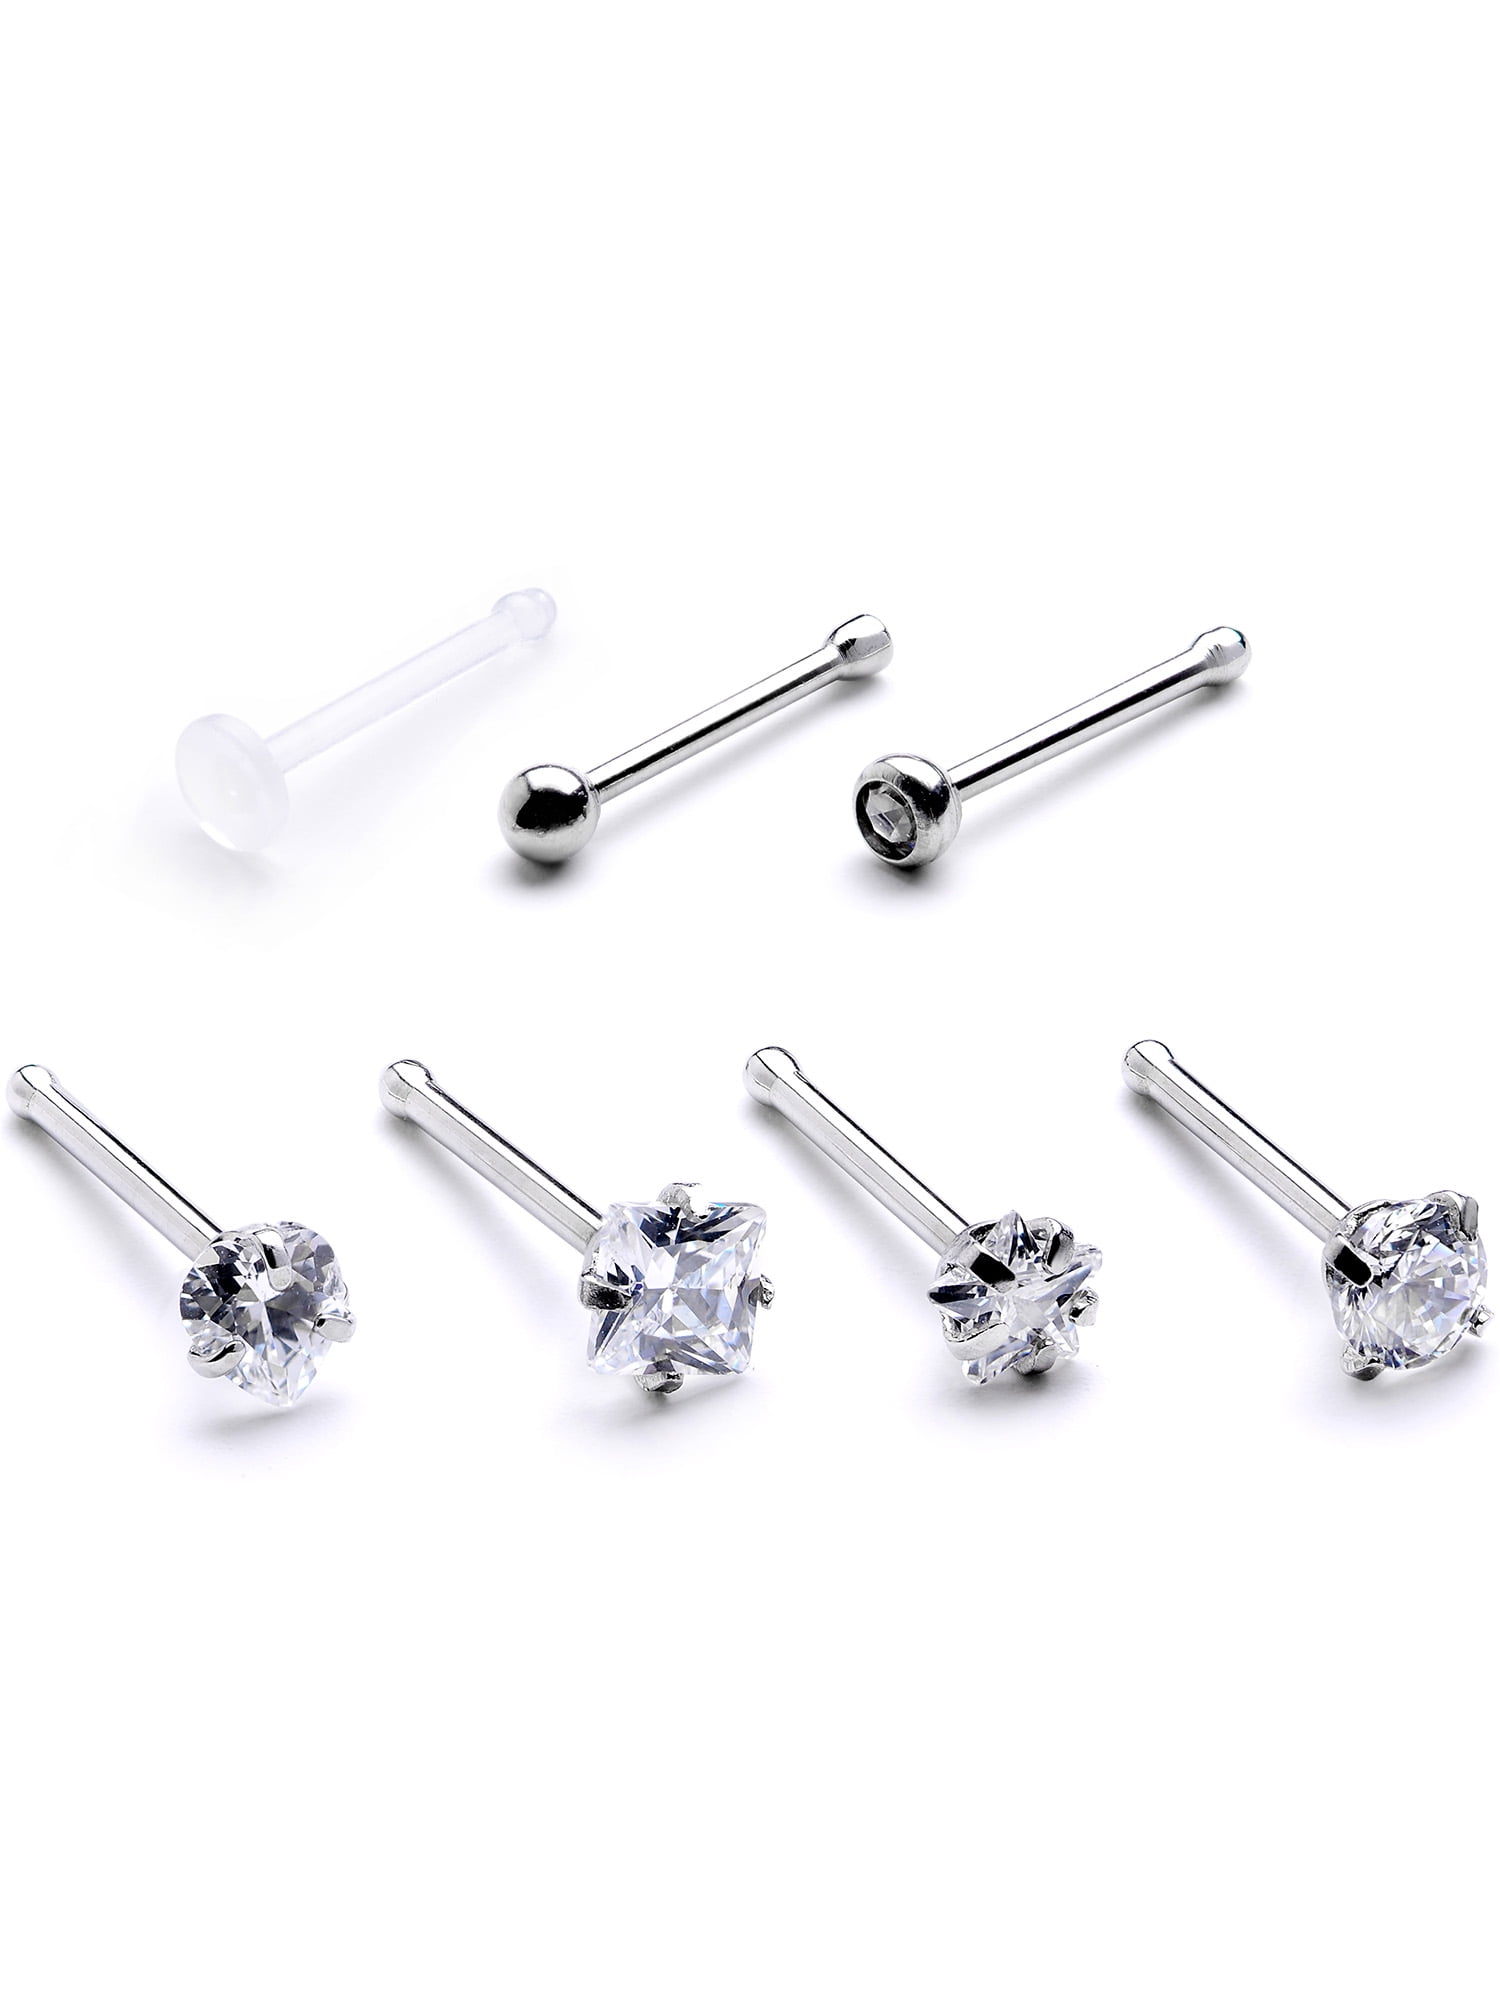 2 Pack Nose Rings Nose Stud Kit Stainless Steel Nose Studs Rings Piercing Pin Body Jewelry 20G 2mm